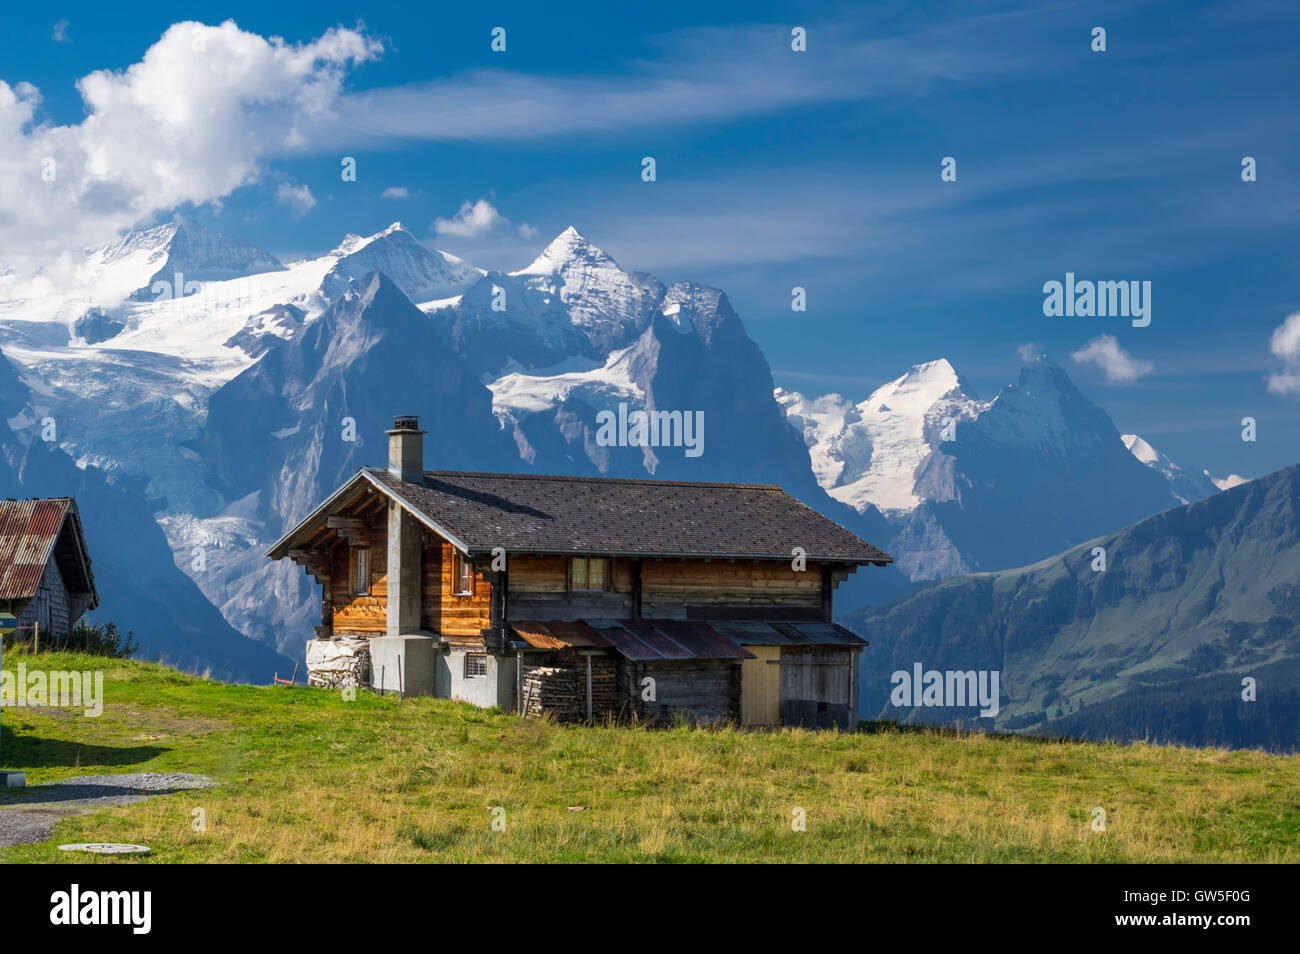 Traditional Wood Decorations in Swiss Alps Stock Image - Image of clock,  chalet: 86954121